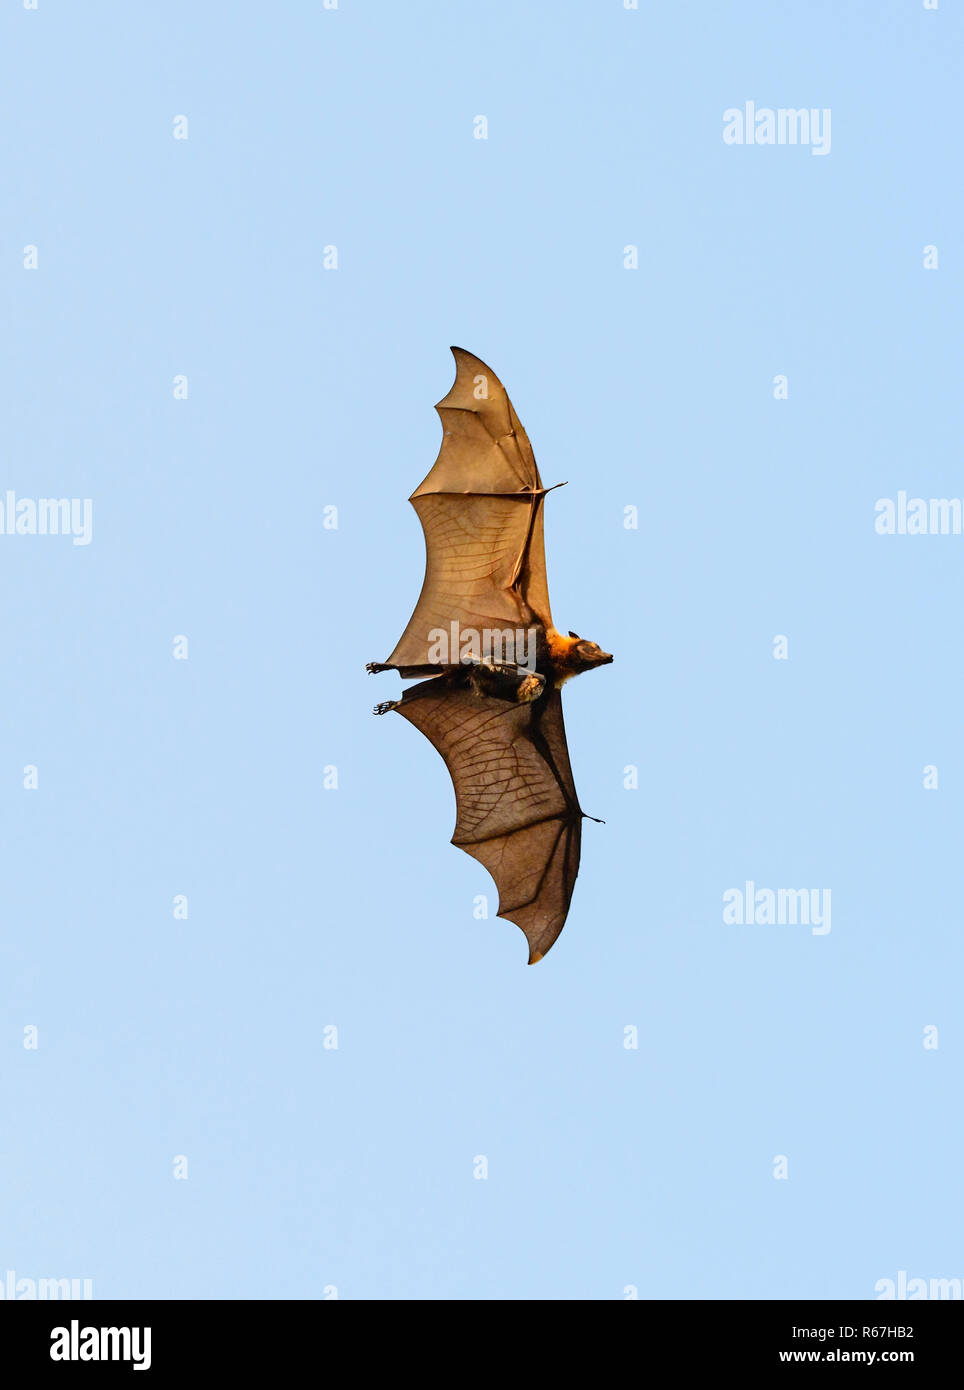 Spectacled flying fox or Spectacled Fruit Bat (Pteropus conspicillatus) in flight carrying a baby, Cairns, Queensland, QLD, Australia Stock Photo